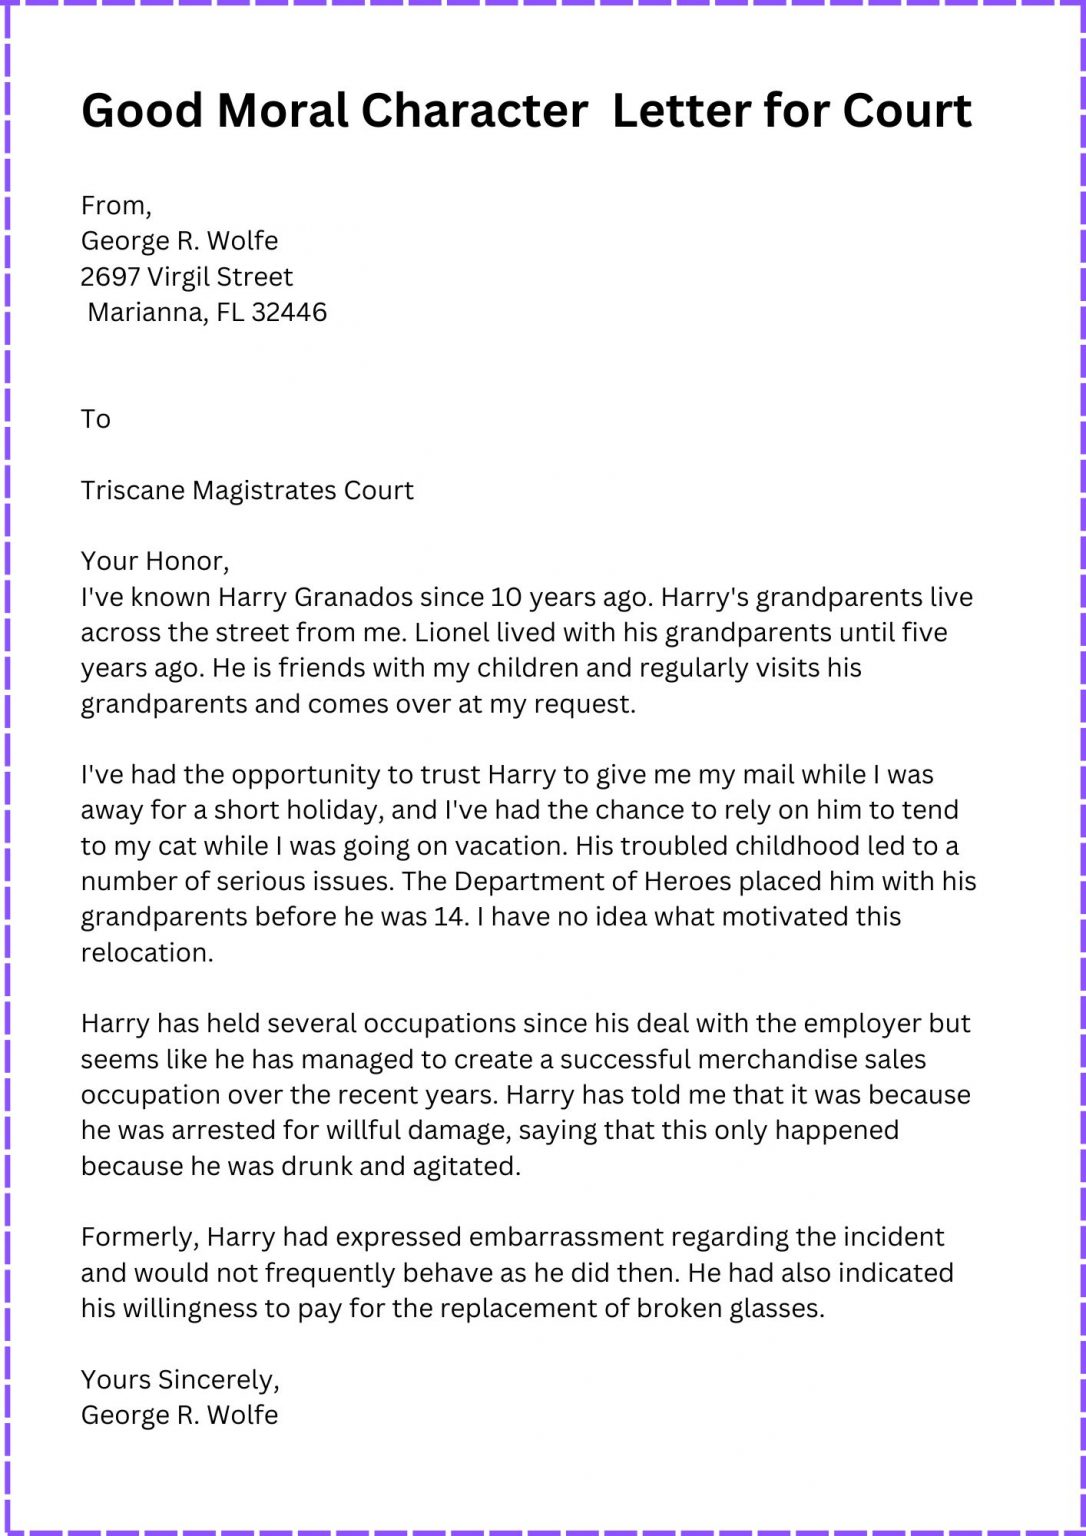 Good Moral Character Character Letter for Court Templates